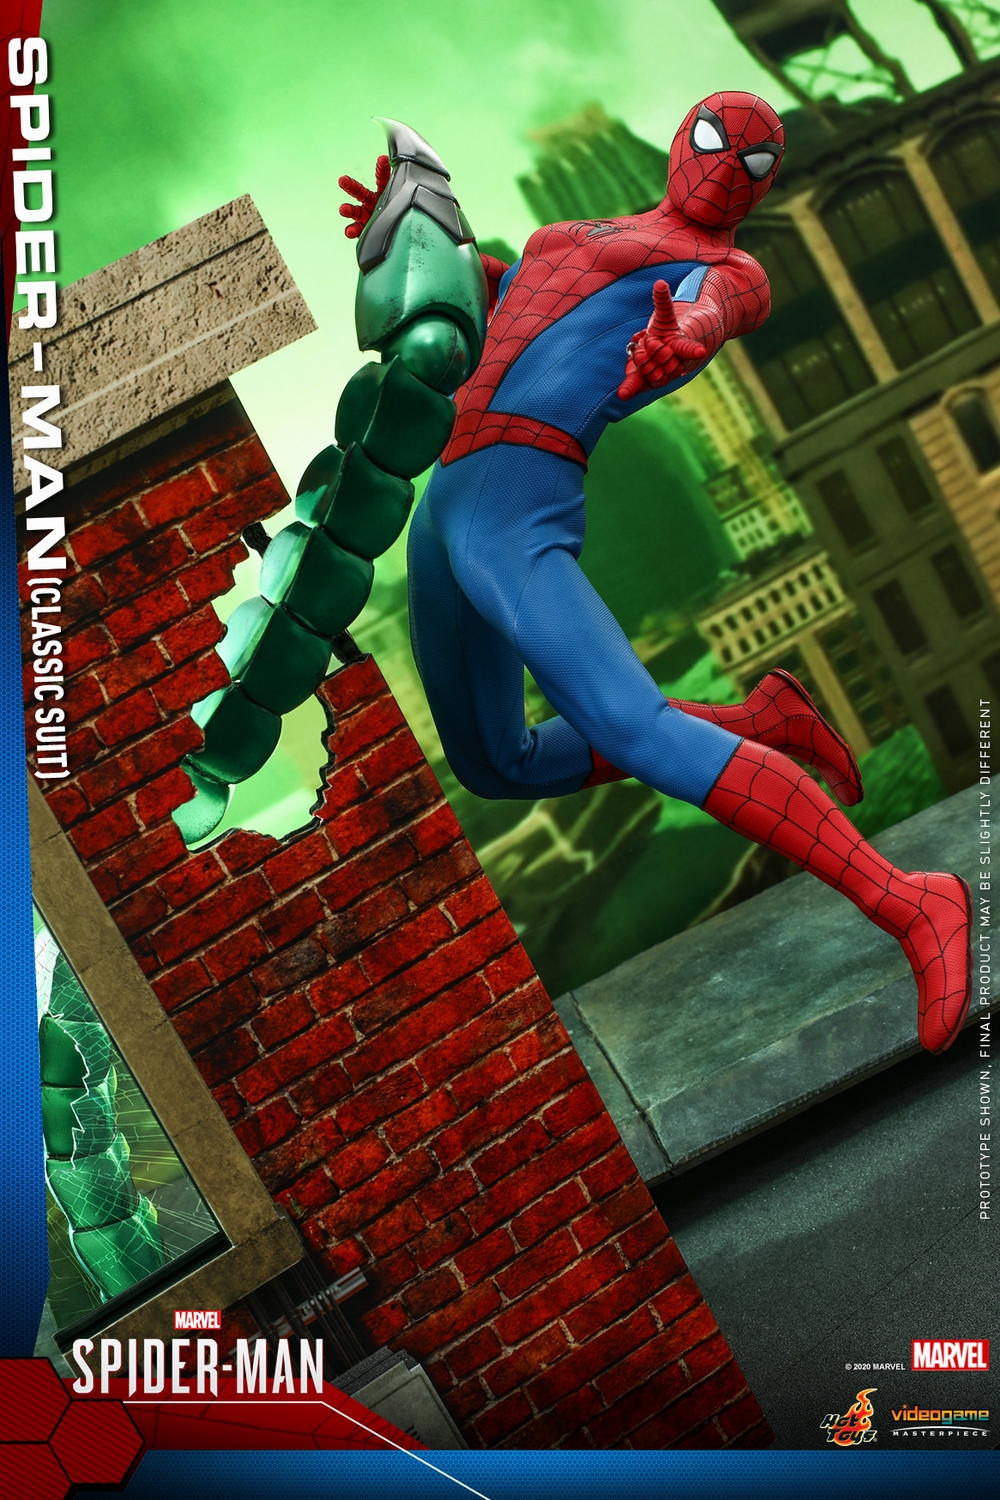 Hot Toys - MSM - Spider-Man (Classic Suit) collectible figure_PR02.jpg